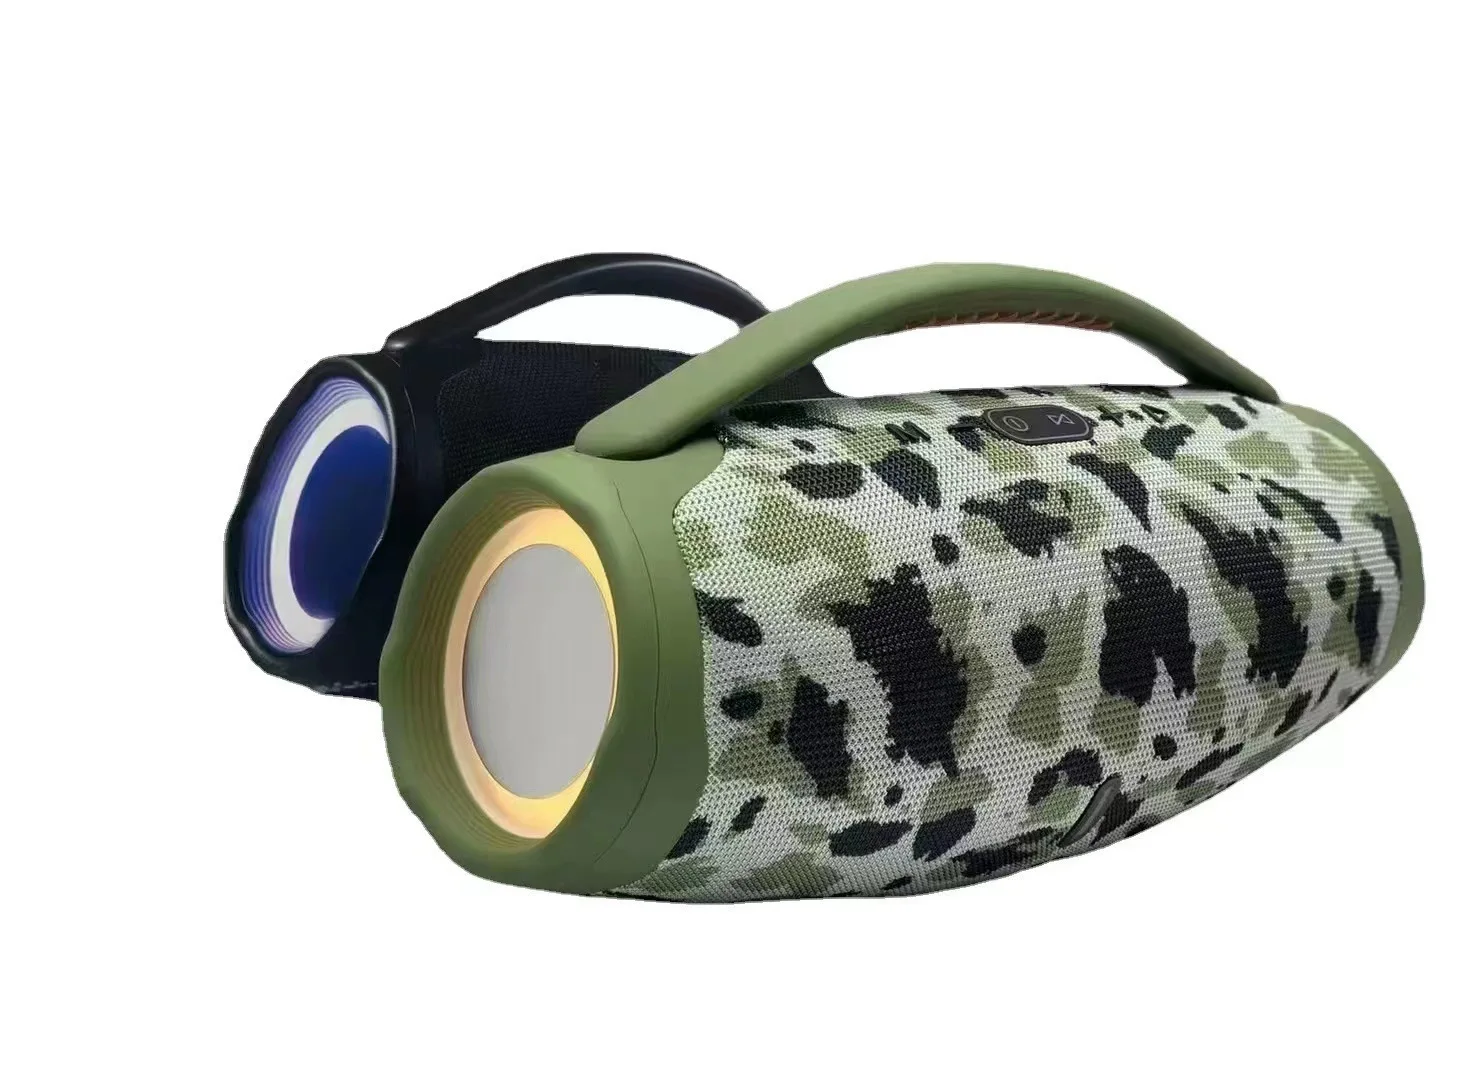 With-Colored-Lights-Booms-Wireless-Bluetooth-Speaker-Outdoor-Home-Wireless-Subwoofer-Resonance-Sound-Portable-Bluetooth-Speakers-5